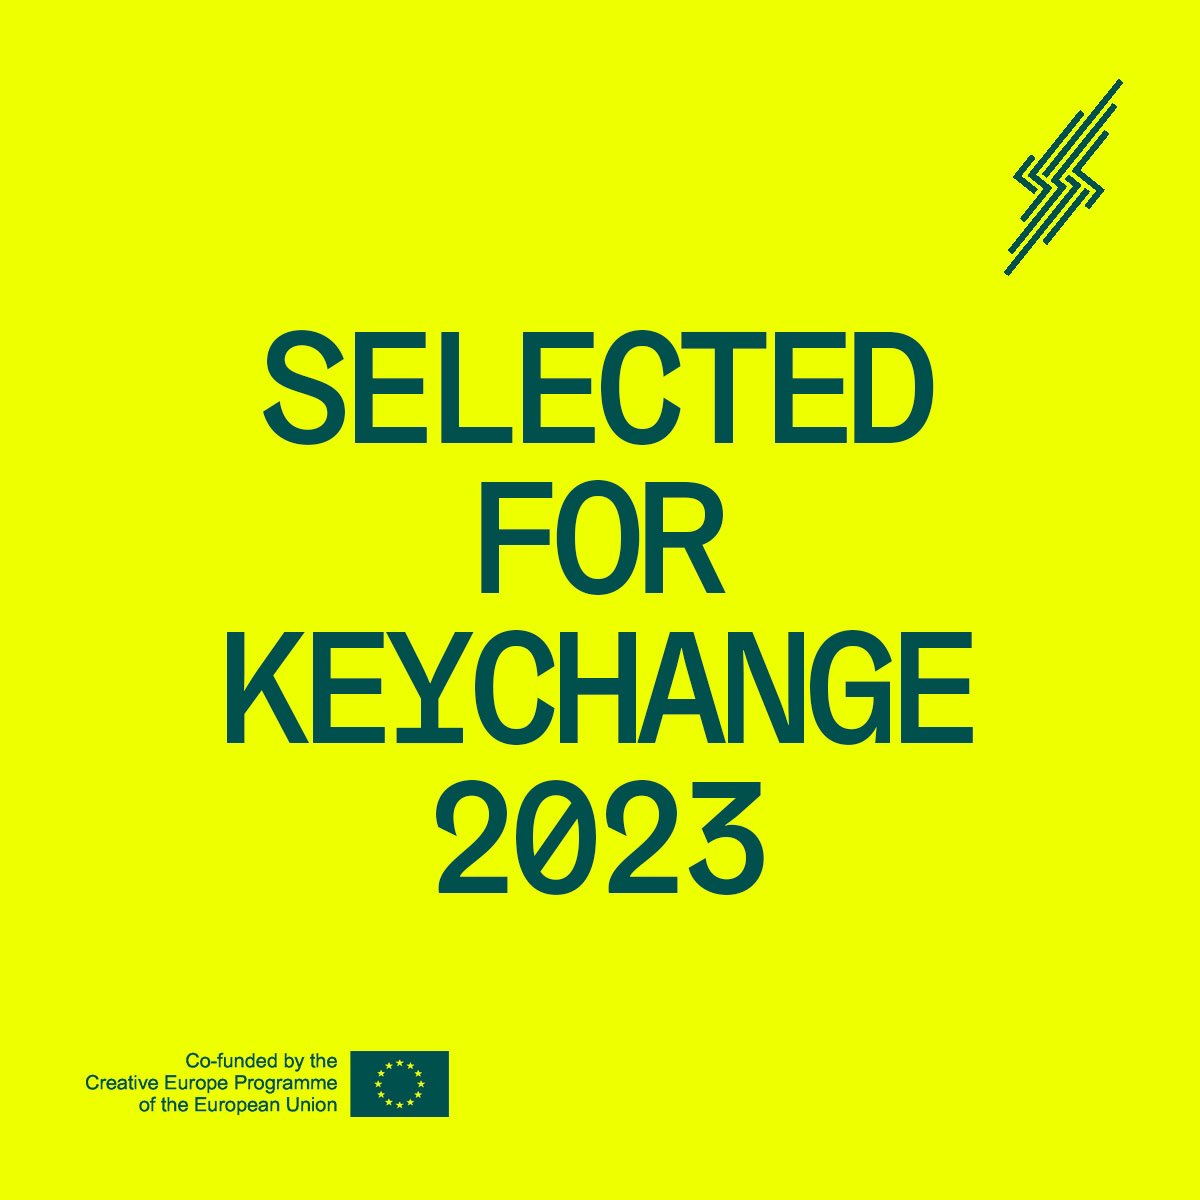 ✨NEWS✨

Excited to be taking part in @KeychangeEU mentoring program for 2023 #keychange #representation #genderbalance